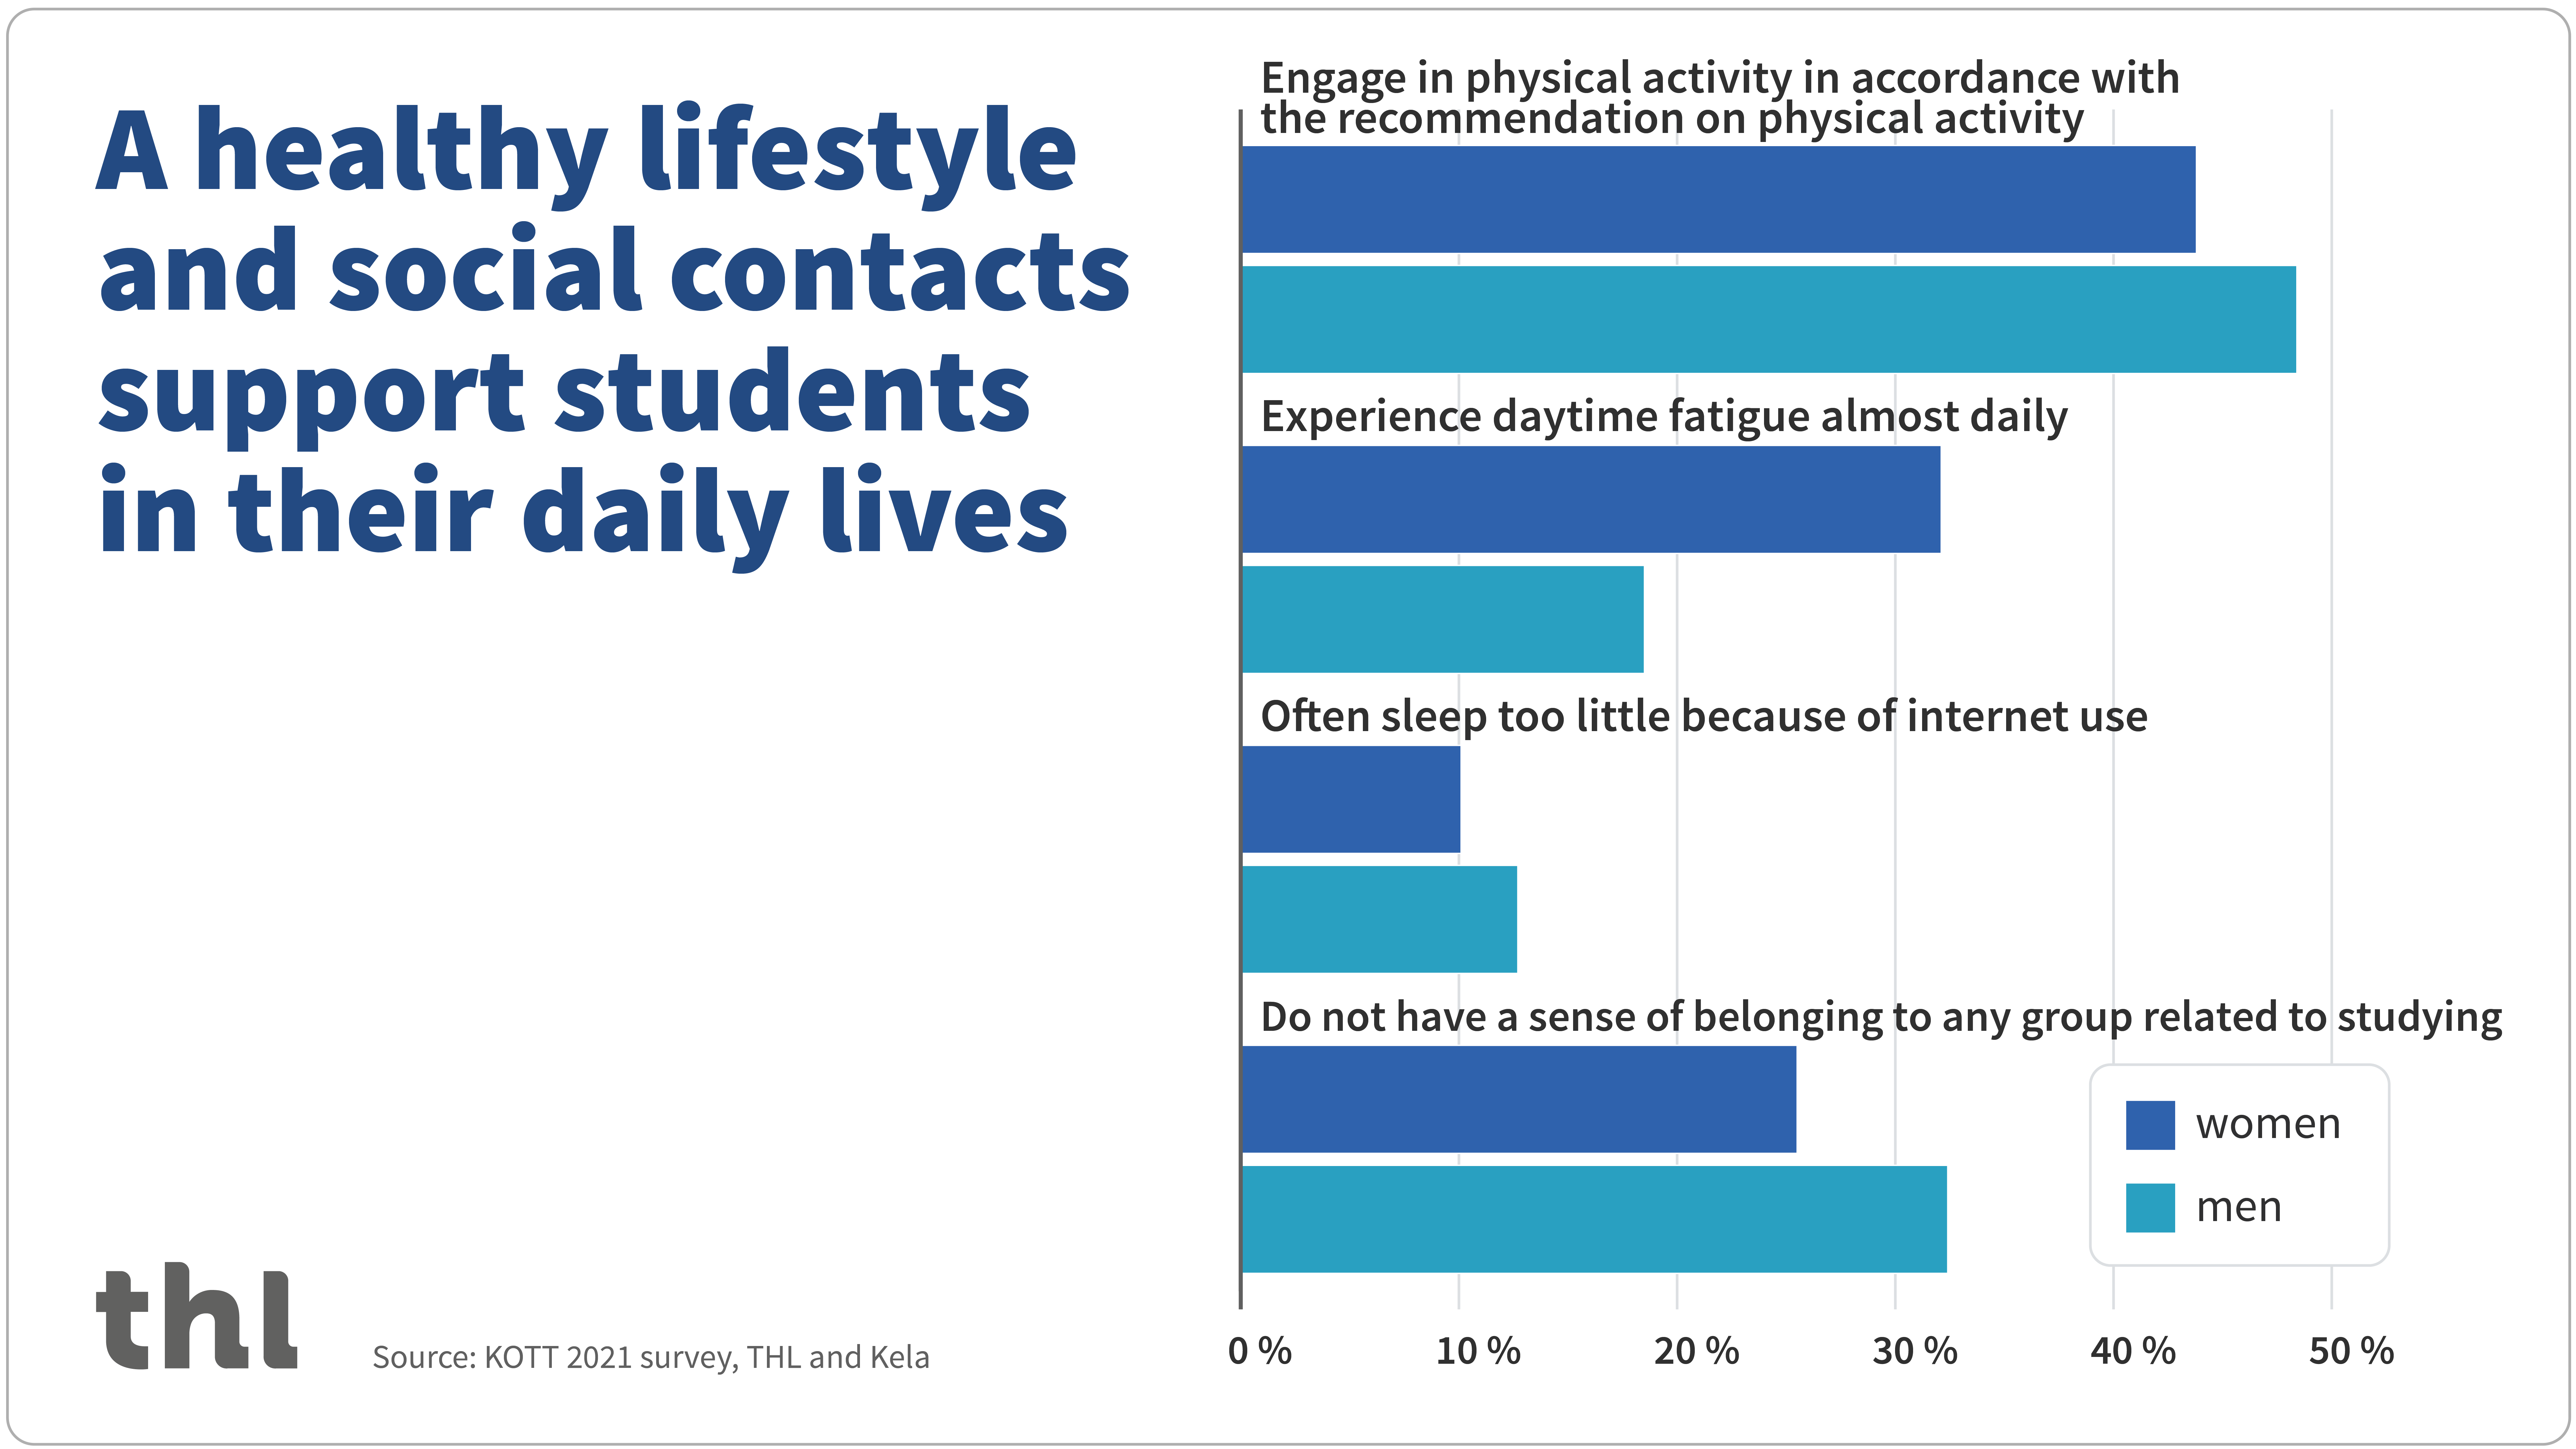 A healthy lifestyle and social contacts support students in their daily lives.